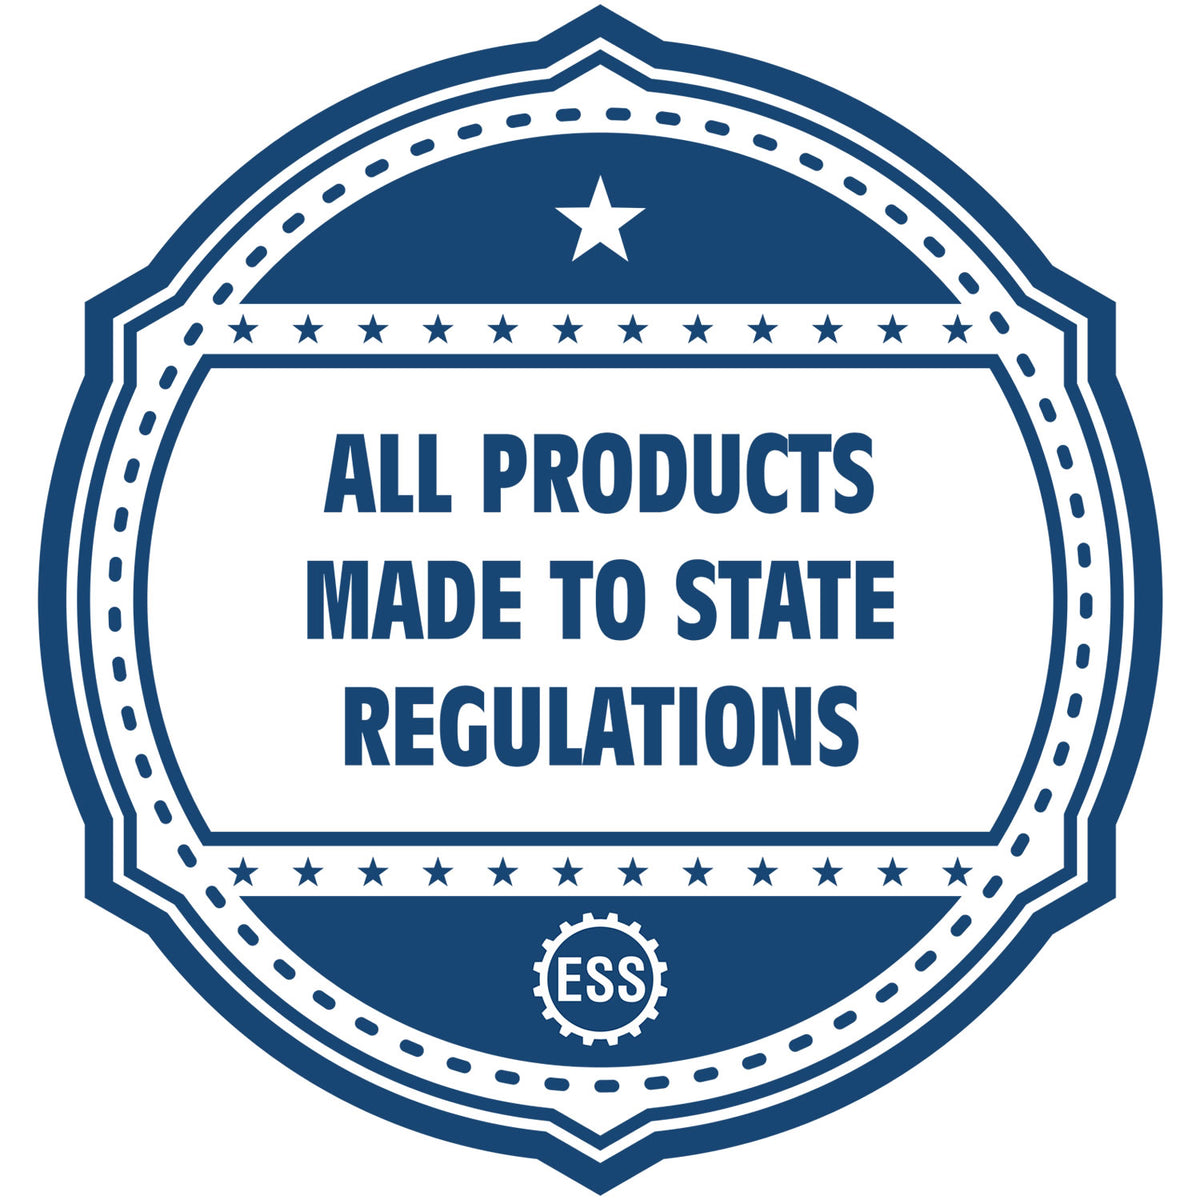 An icon or badge element for the Digital Georgia Landscape Architect Stamp showing that this product is made in compliance with state regulations.